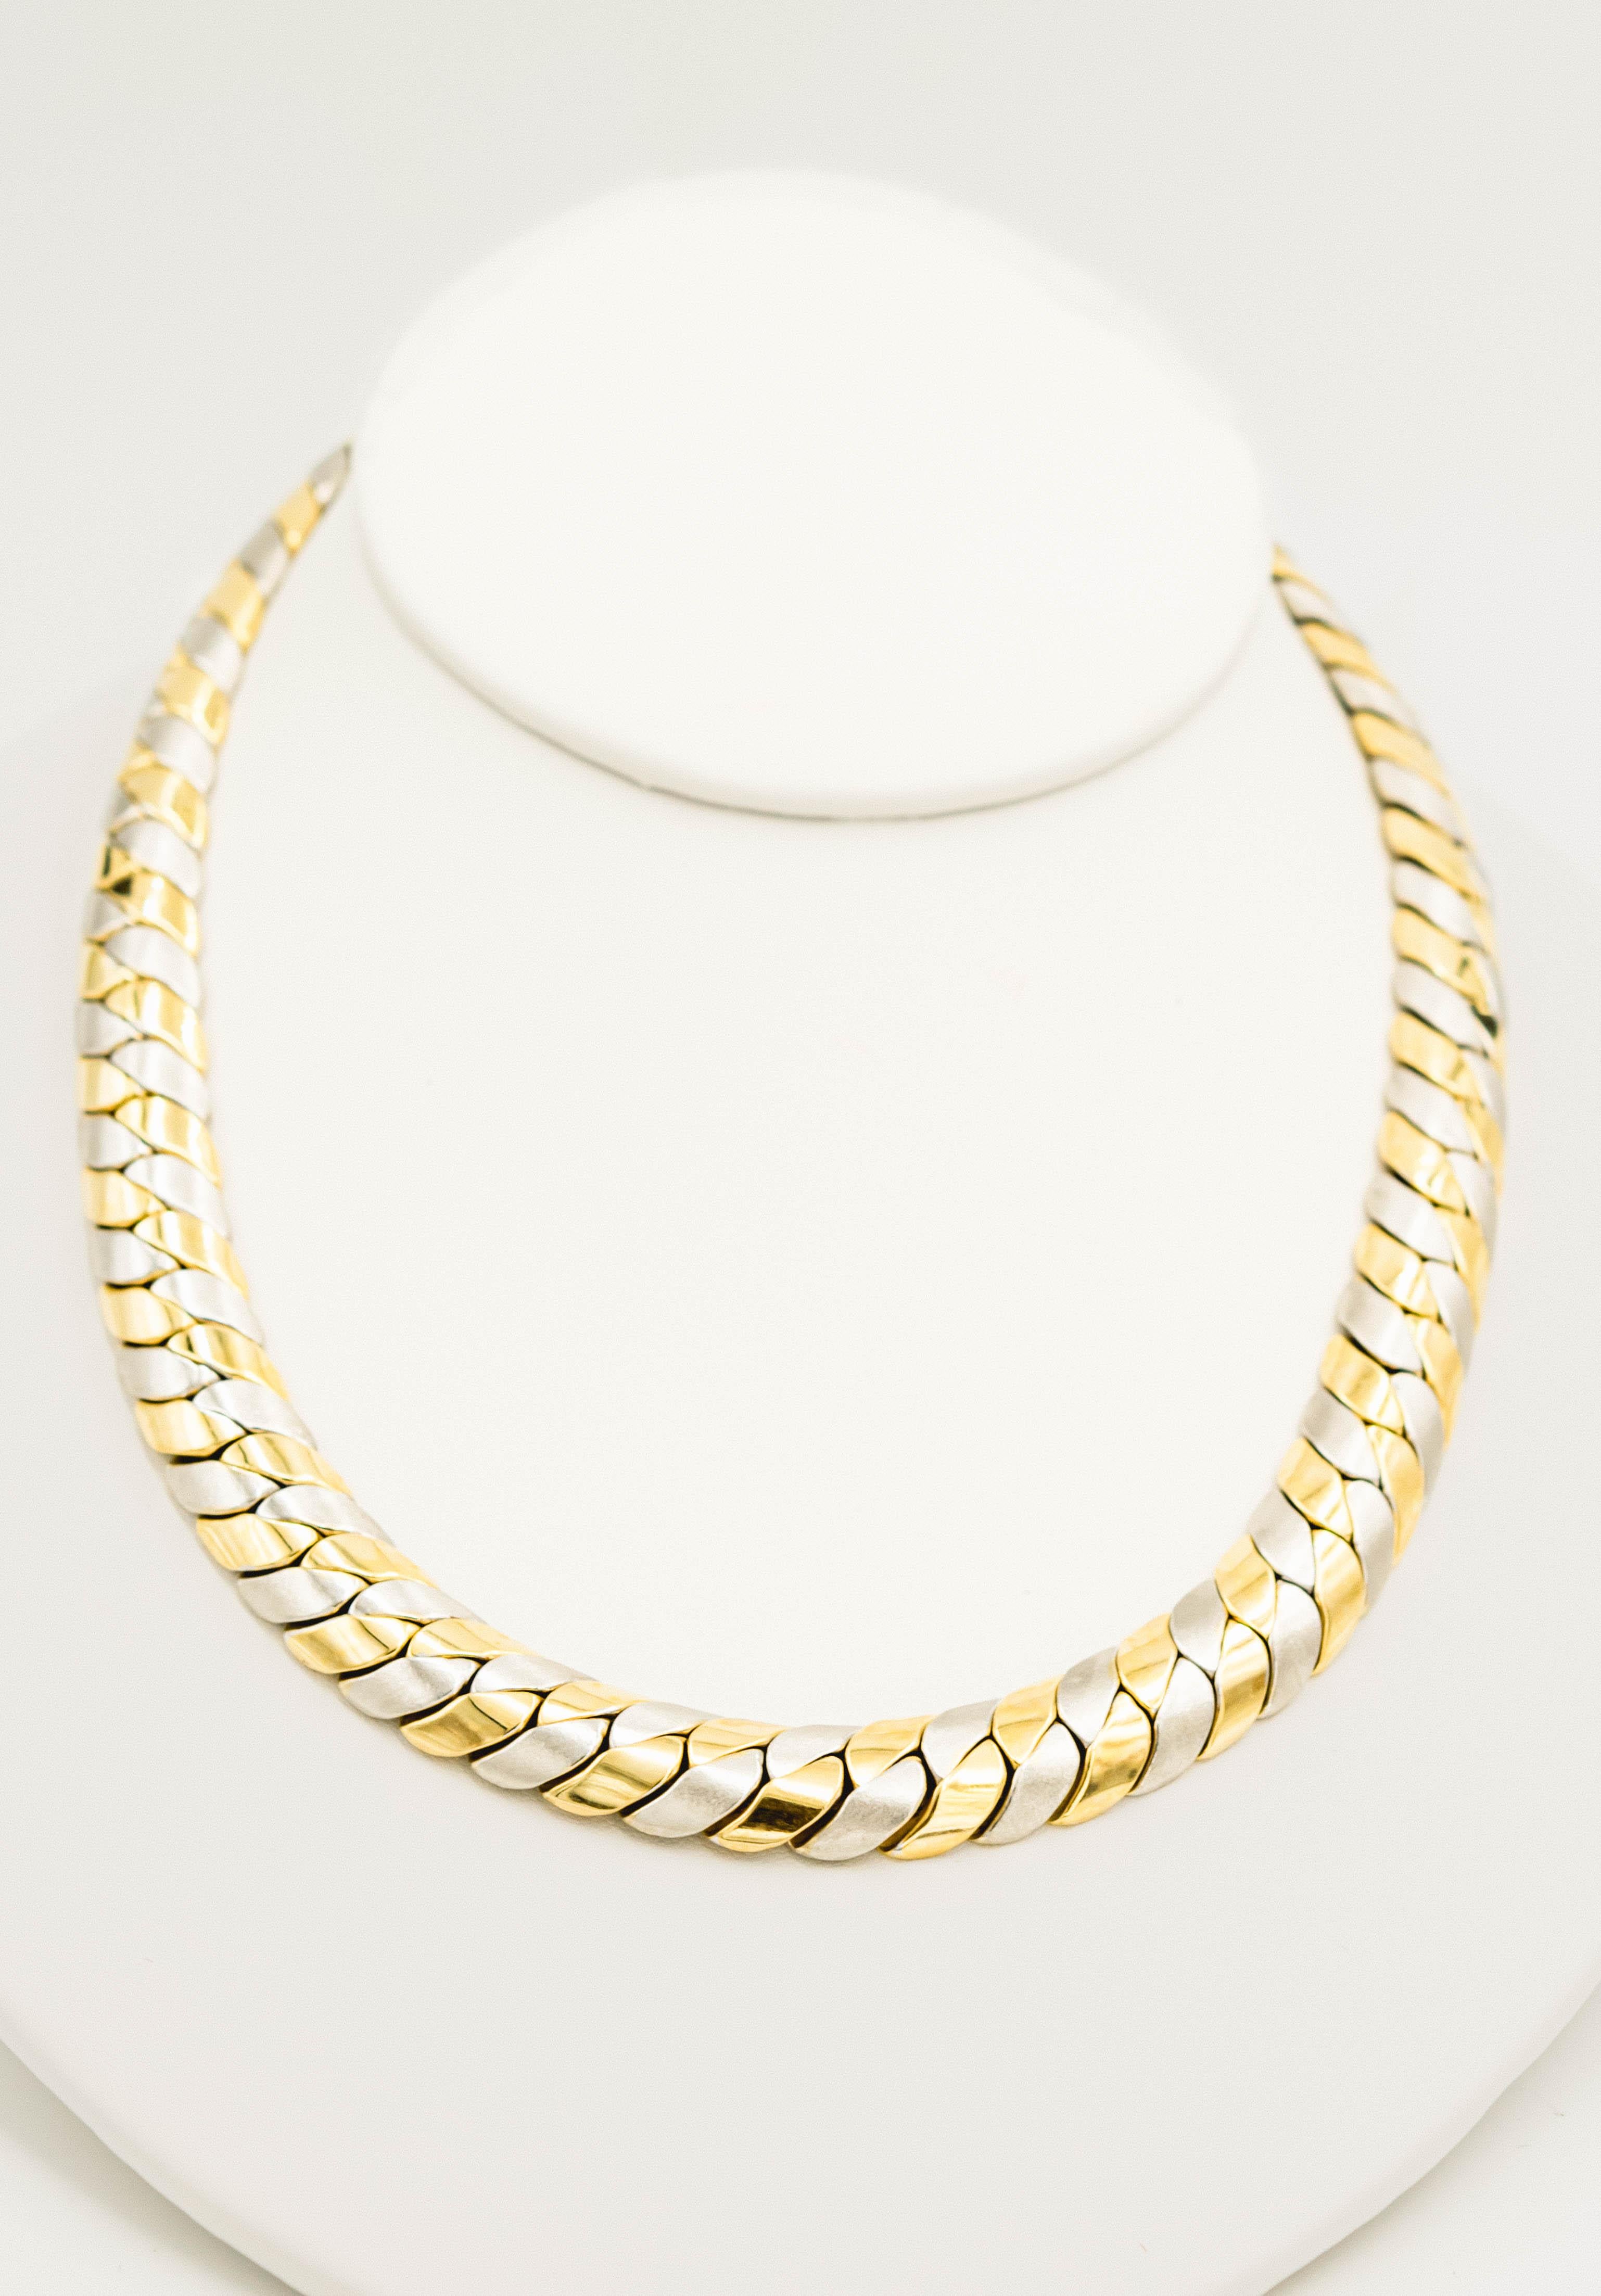 Two Tone Yellow and White Gold Italian Braid Necklace & Bracelet Suite For Sale 4